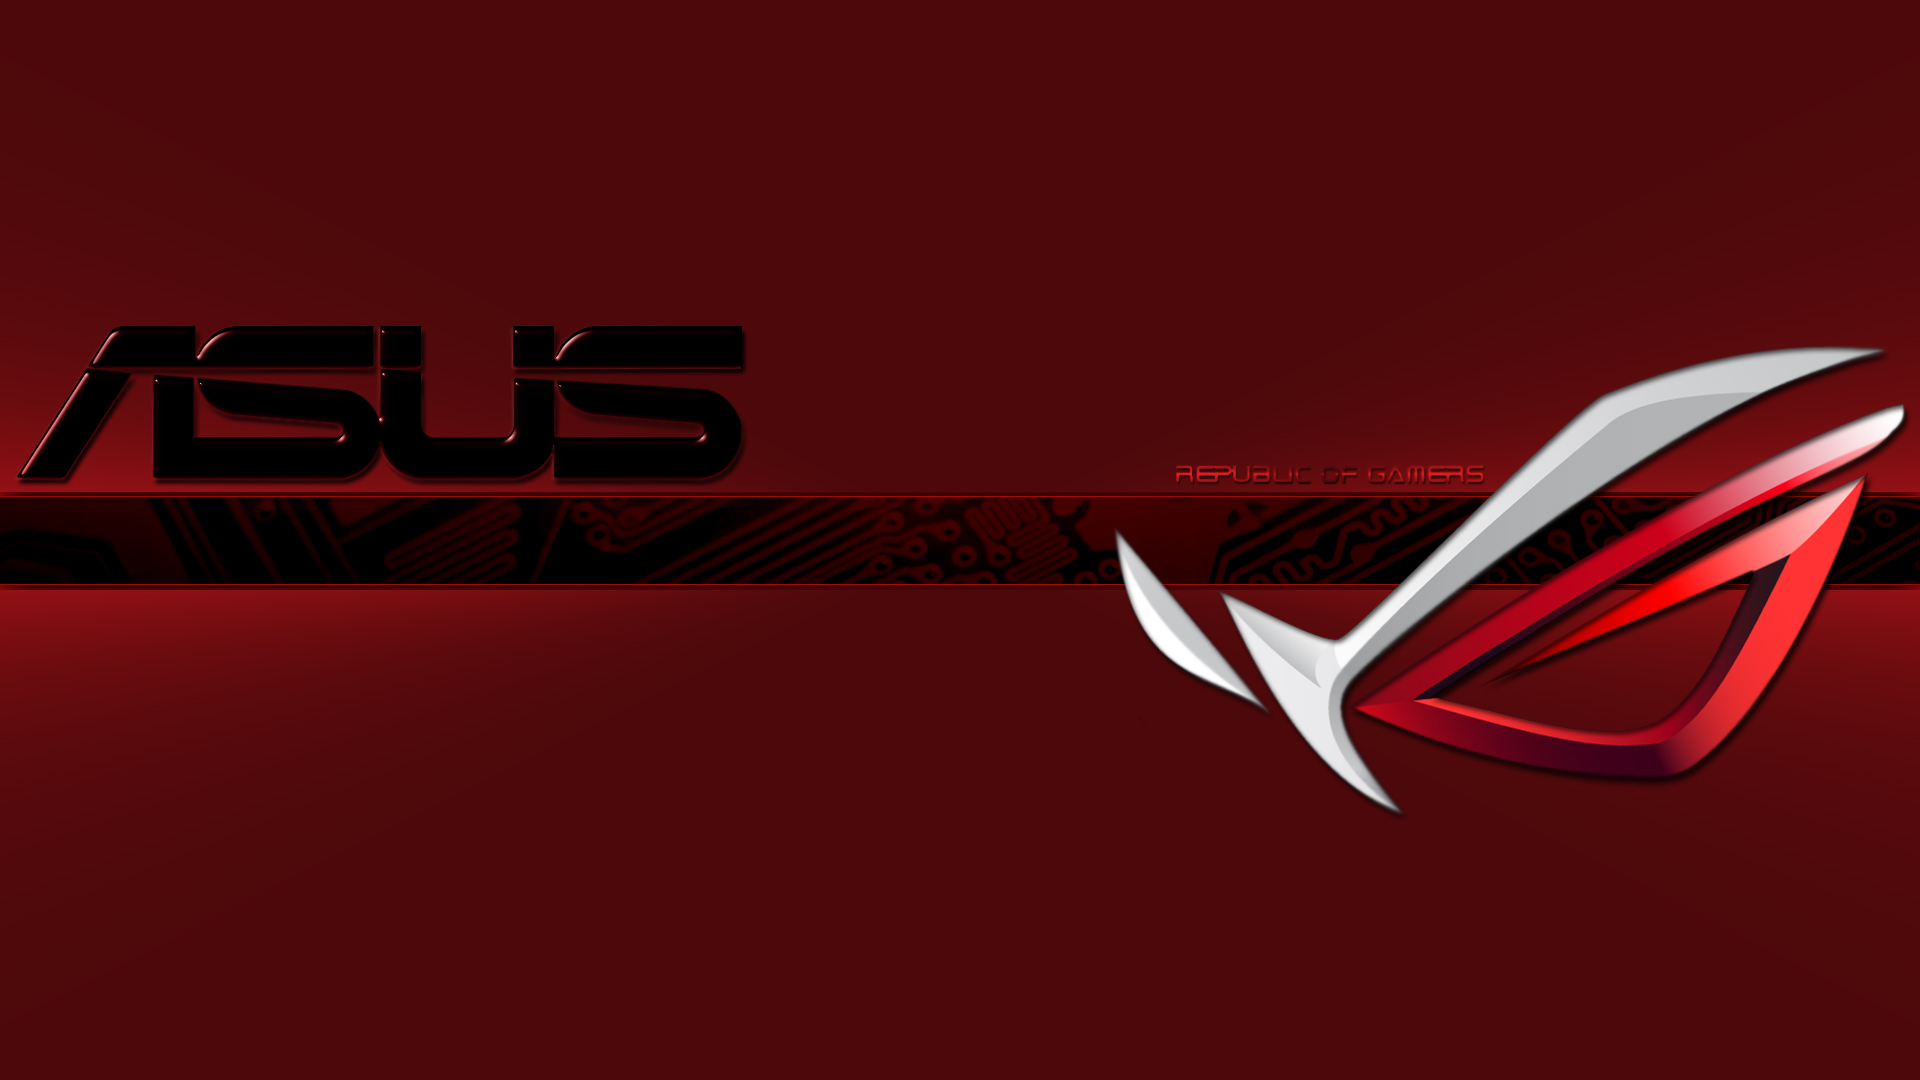 asus wallpaper full hd,red,text,font,logo,graphic design